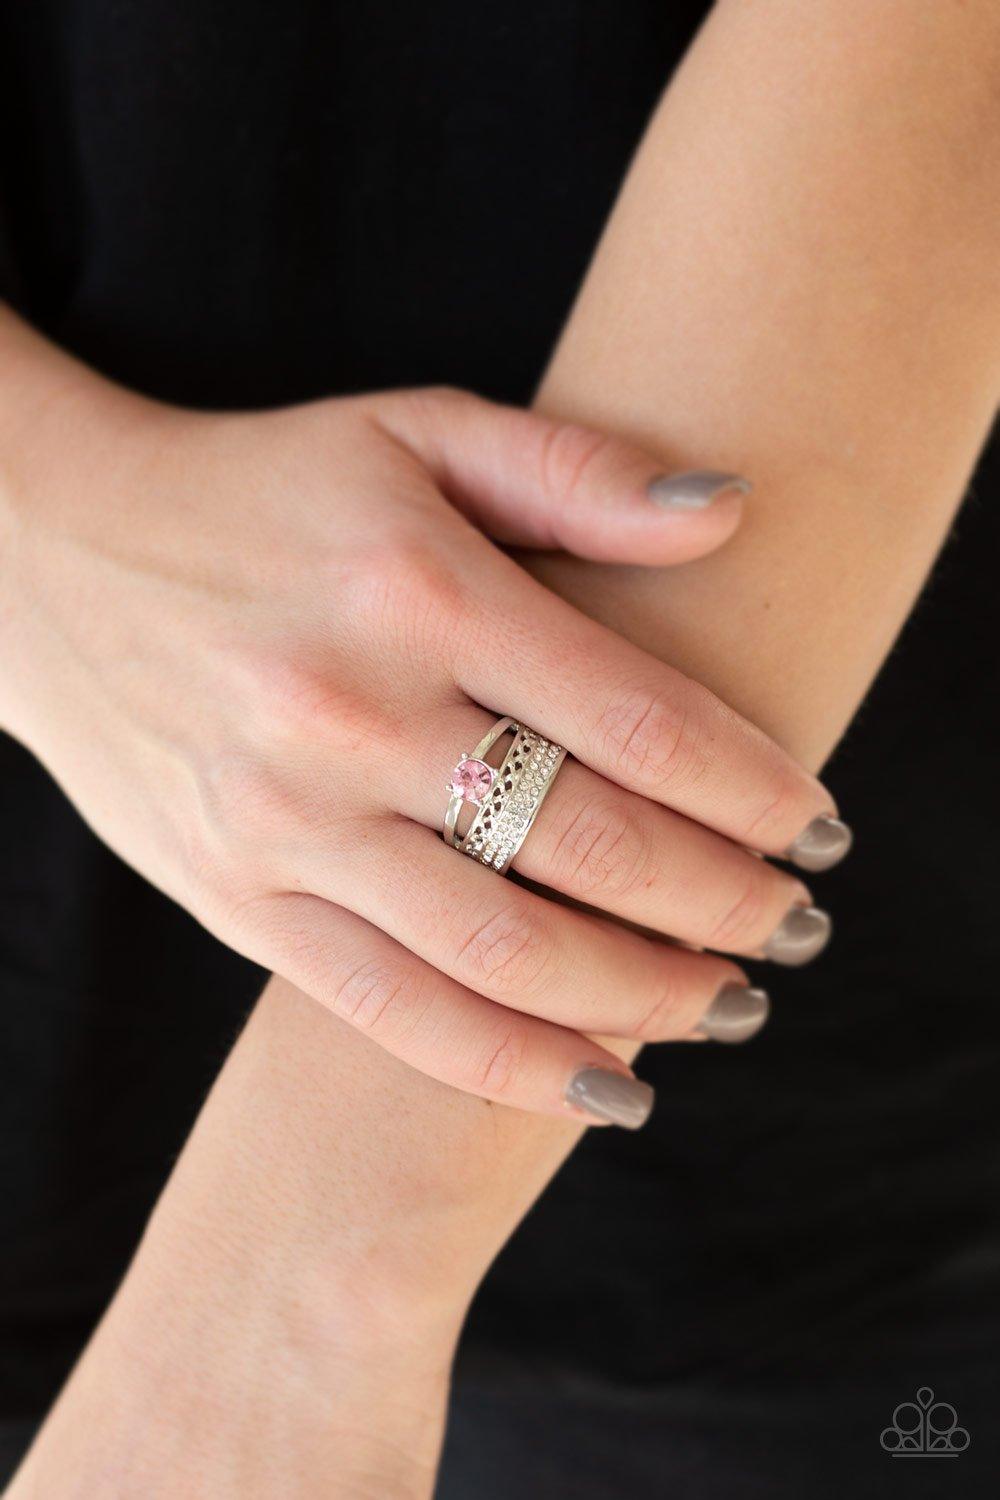 Paparazzi Accessories-The Overachiever - Pink Ring